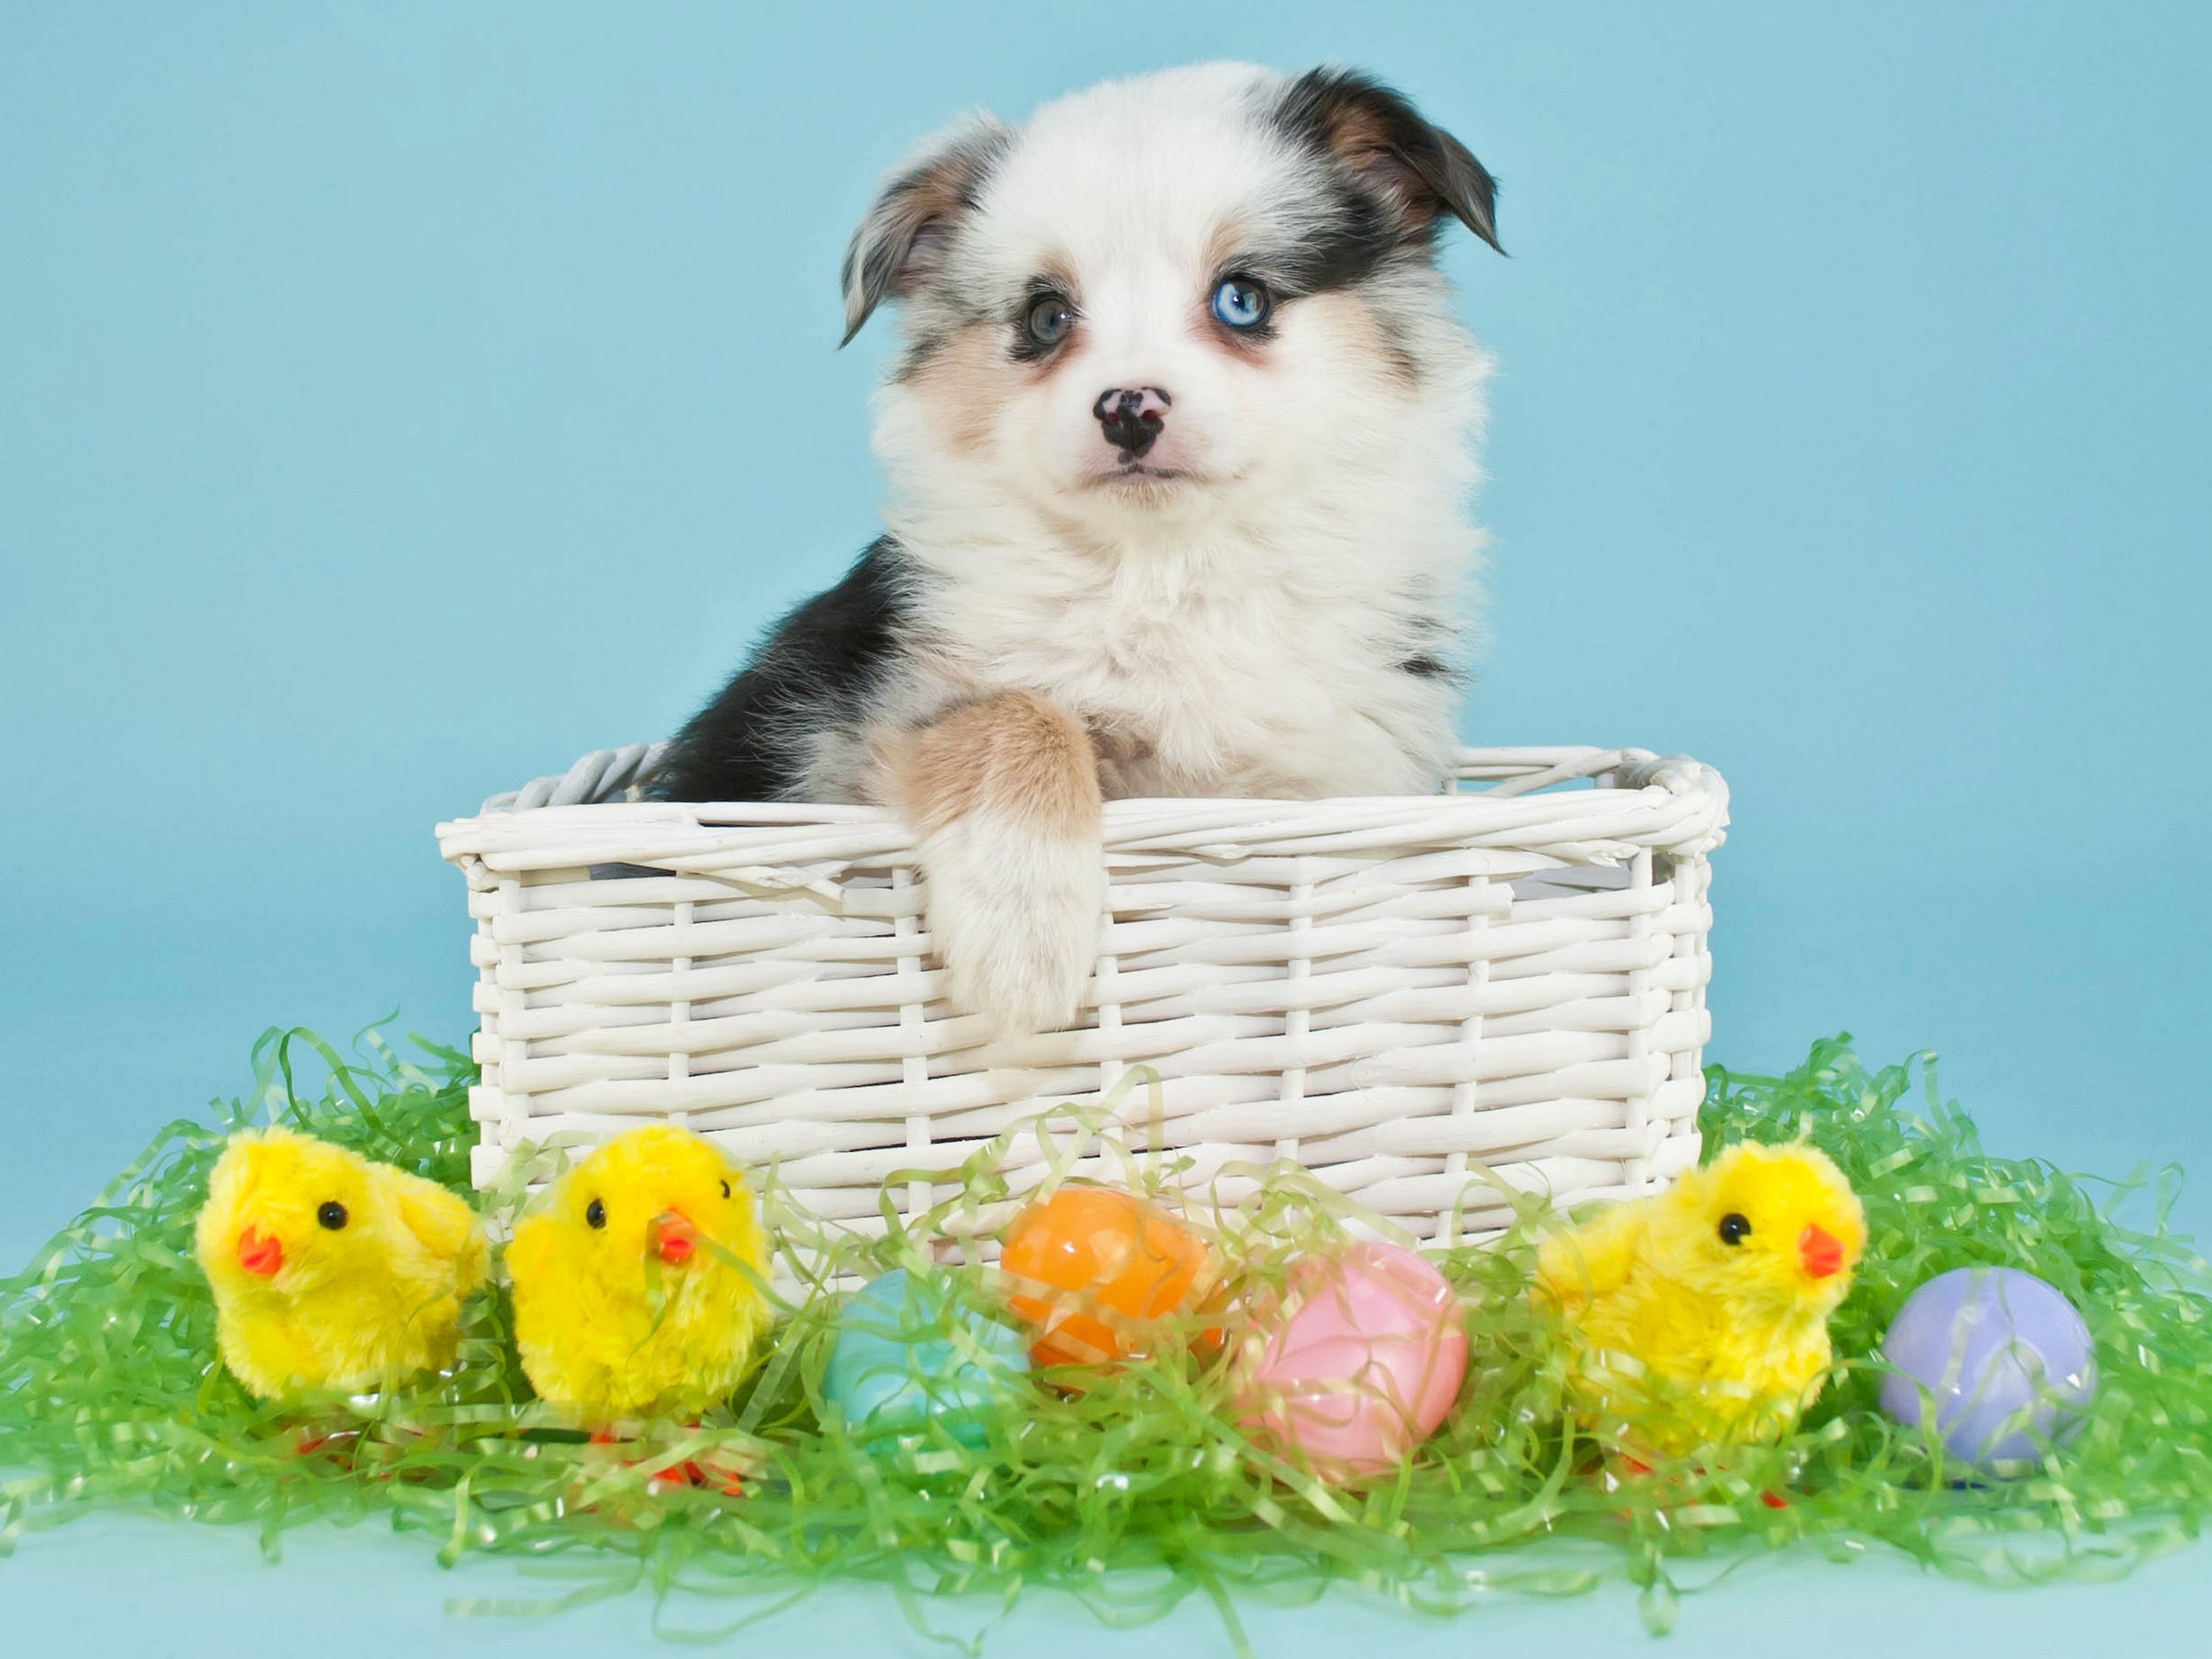 dogs, Holidays, Easter, Chickens, Puppy, Wicker, Basket, Eggs, Animals Wallpaper HD / Desktop and Mobile Background